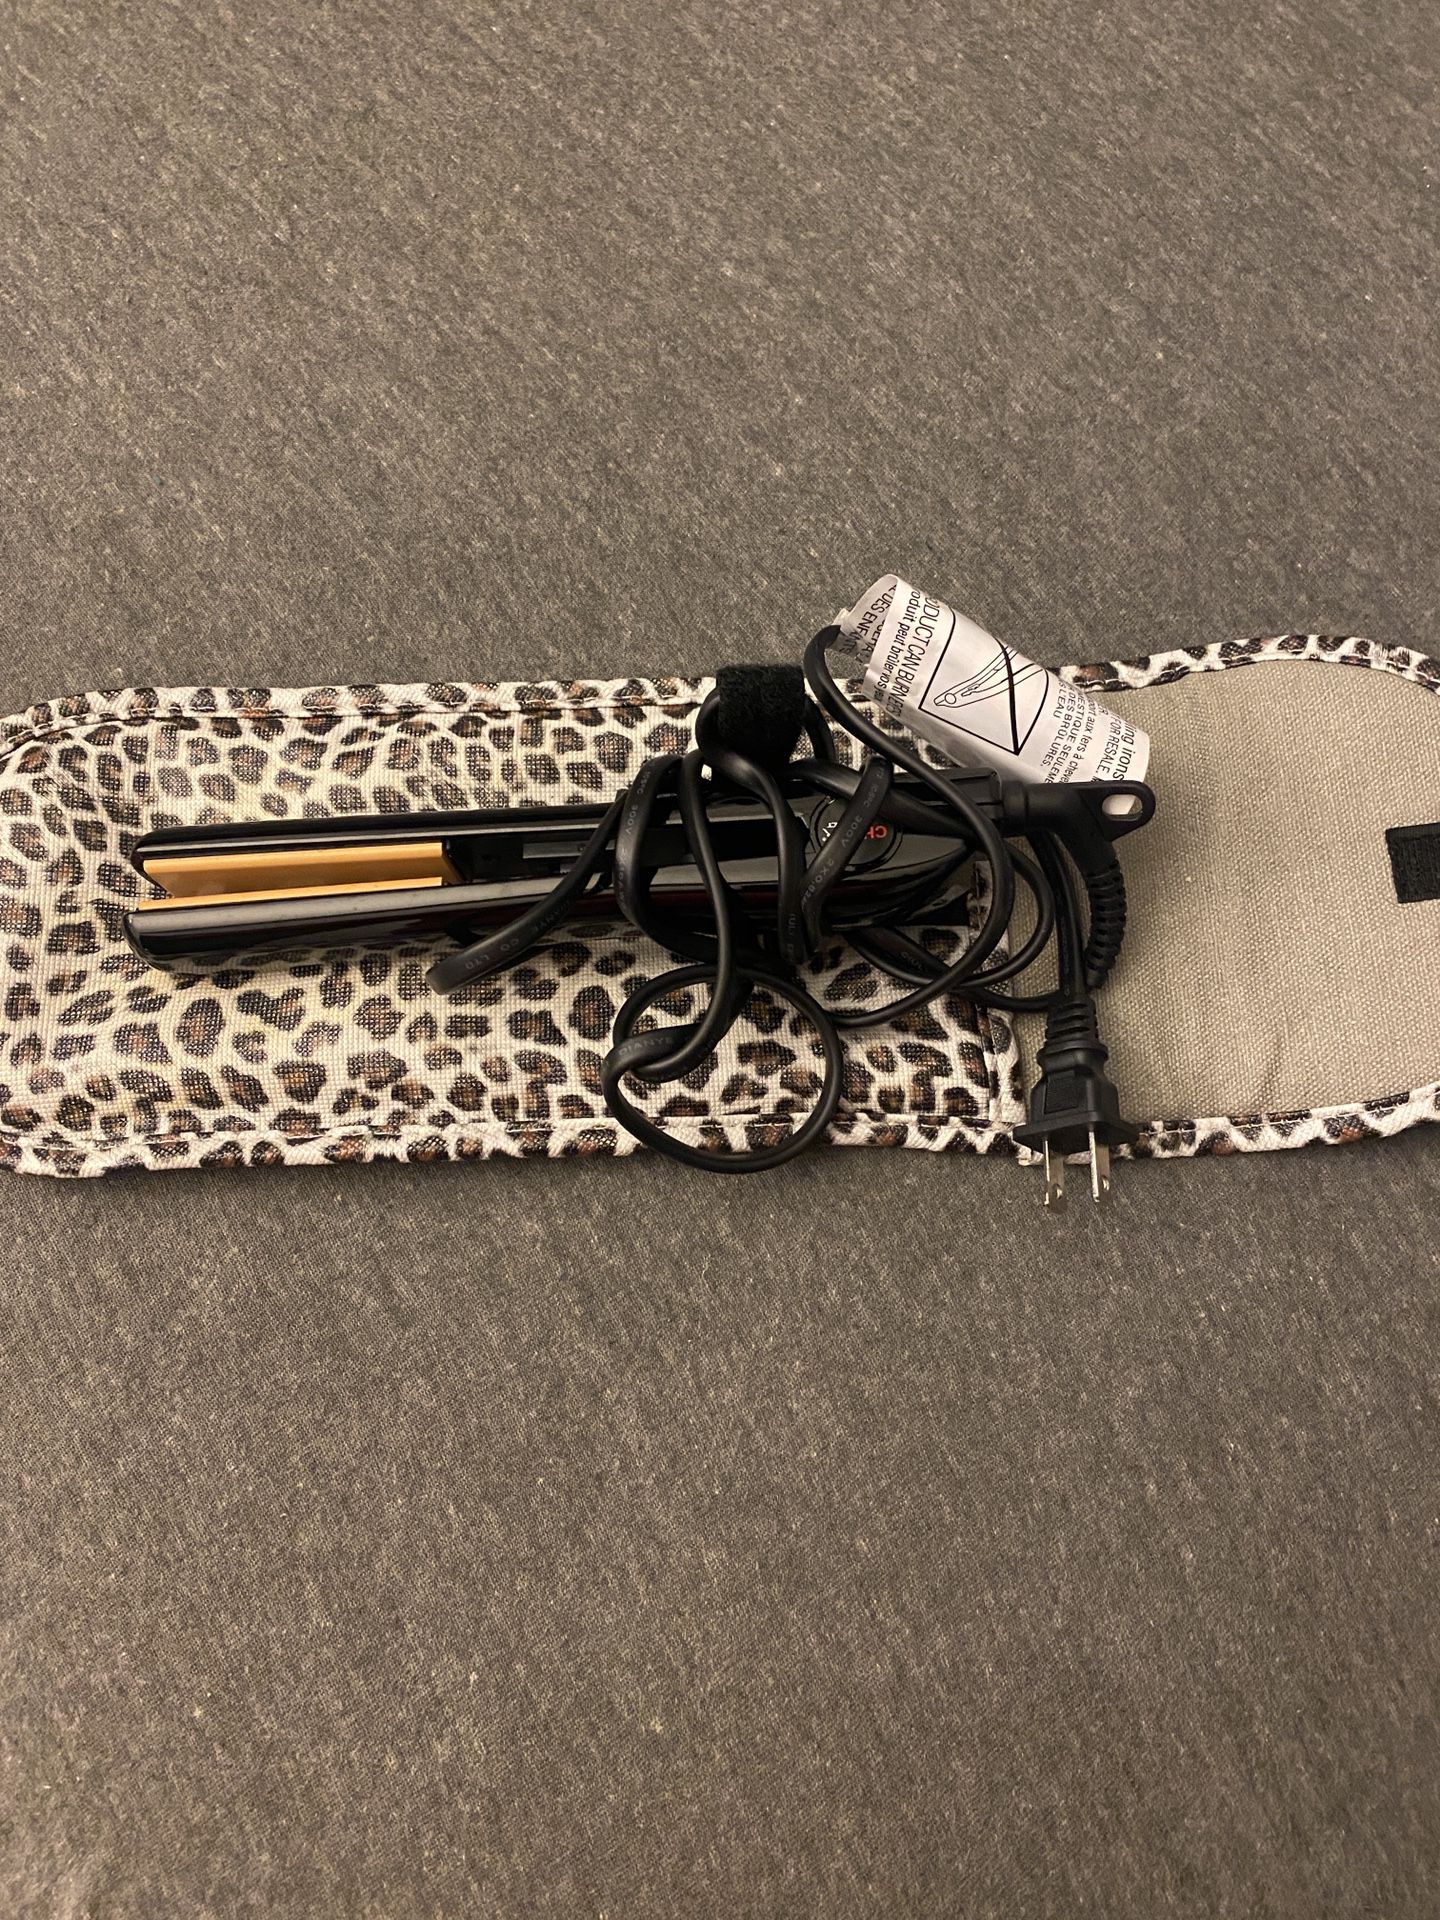 Chi Air Hair Styling Iron 